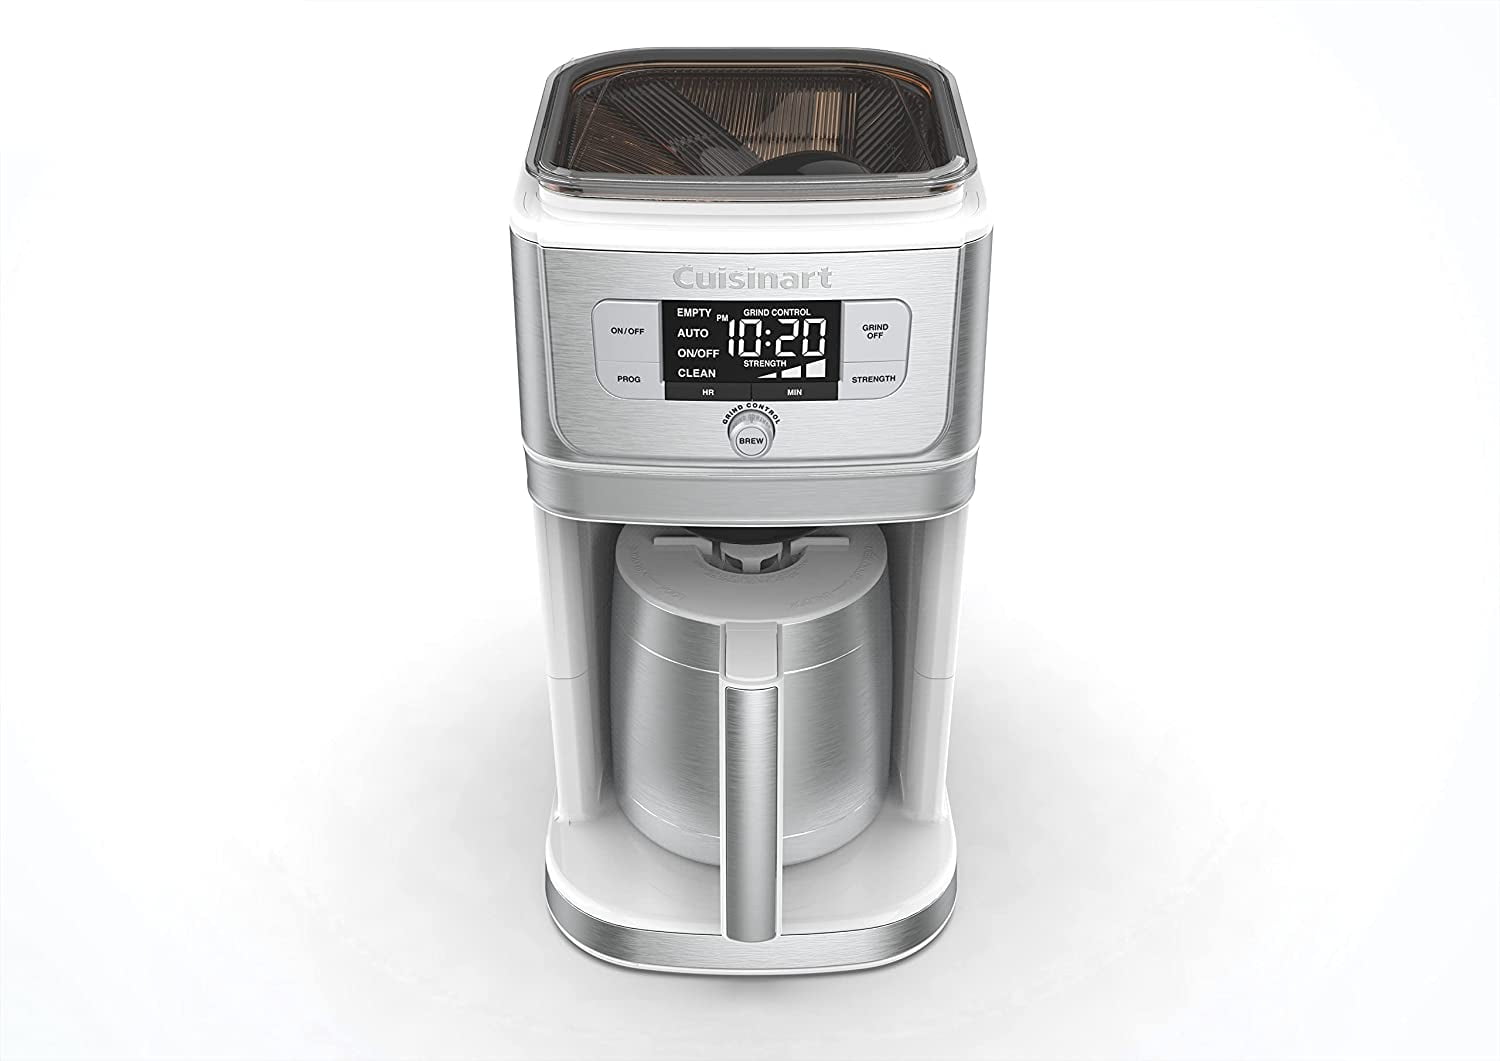 CUISINART COFFEE GRINDER & BREWER DGB-500 12 CUP COFFEE MAKER WHITE Tested  ✓